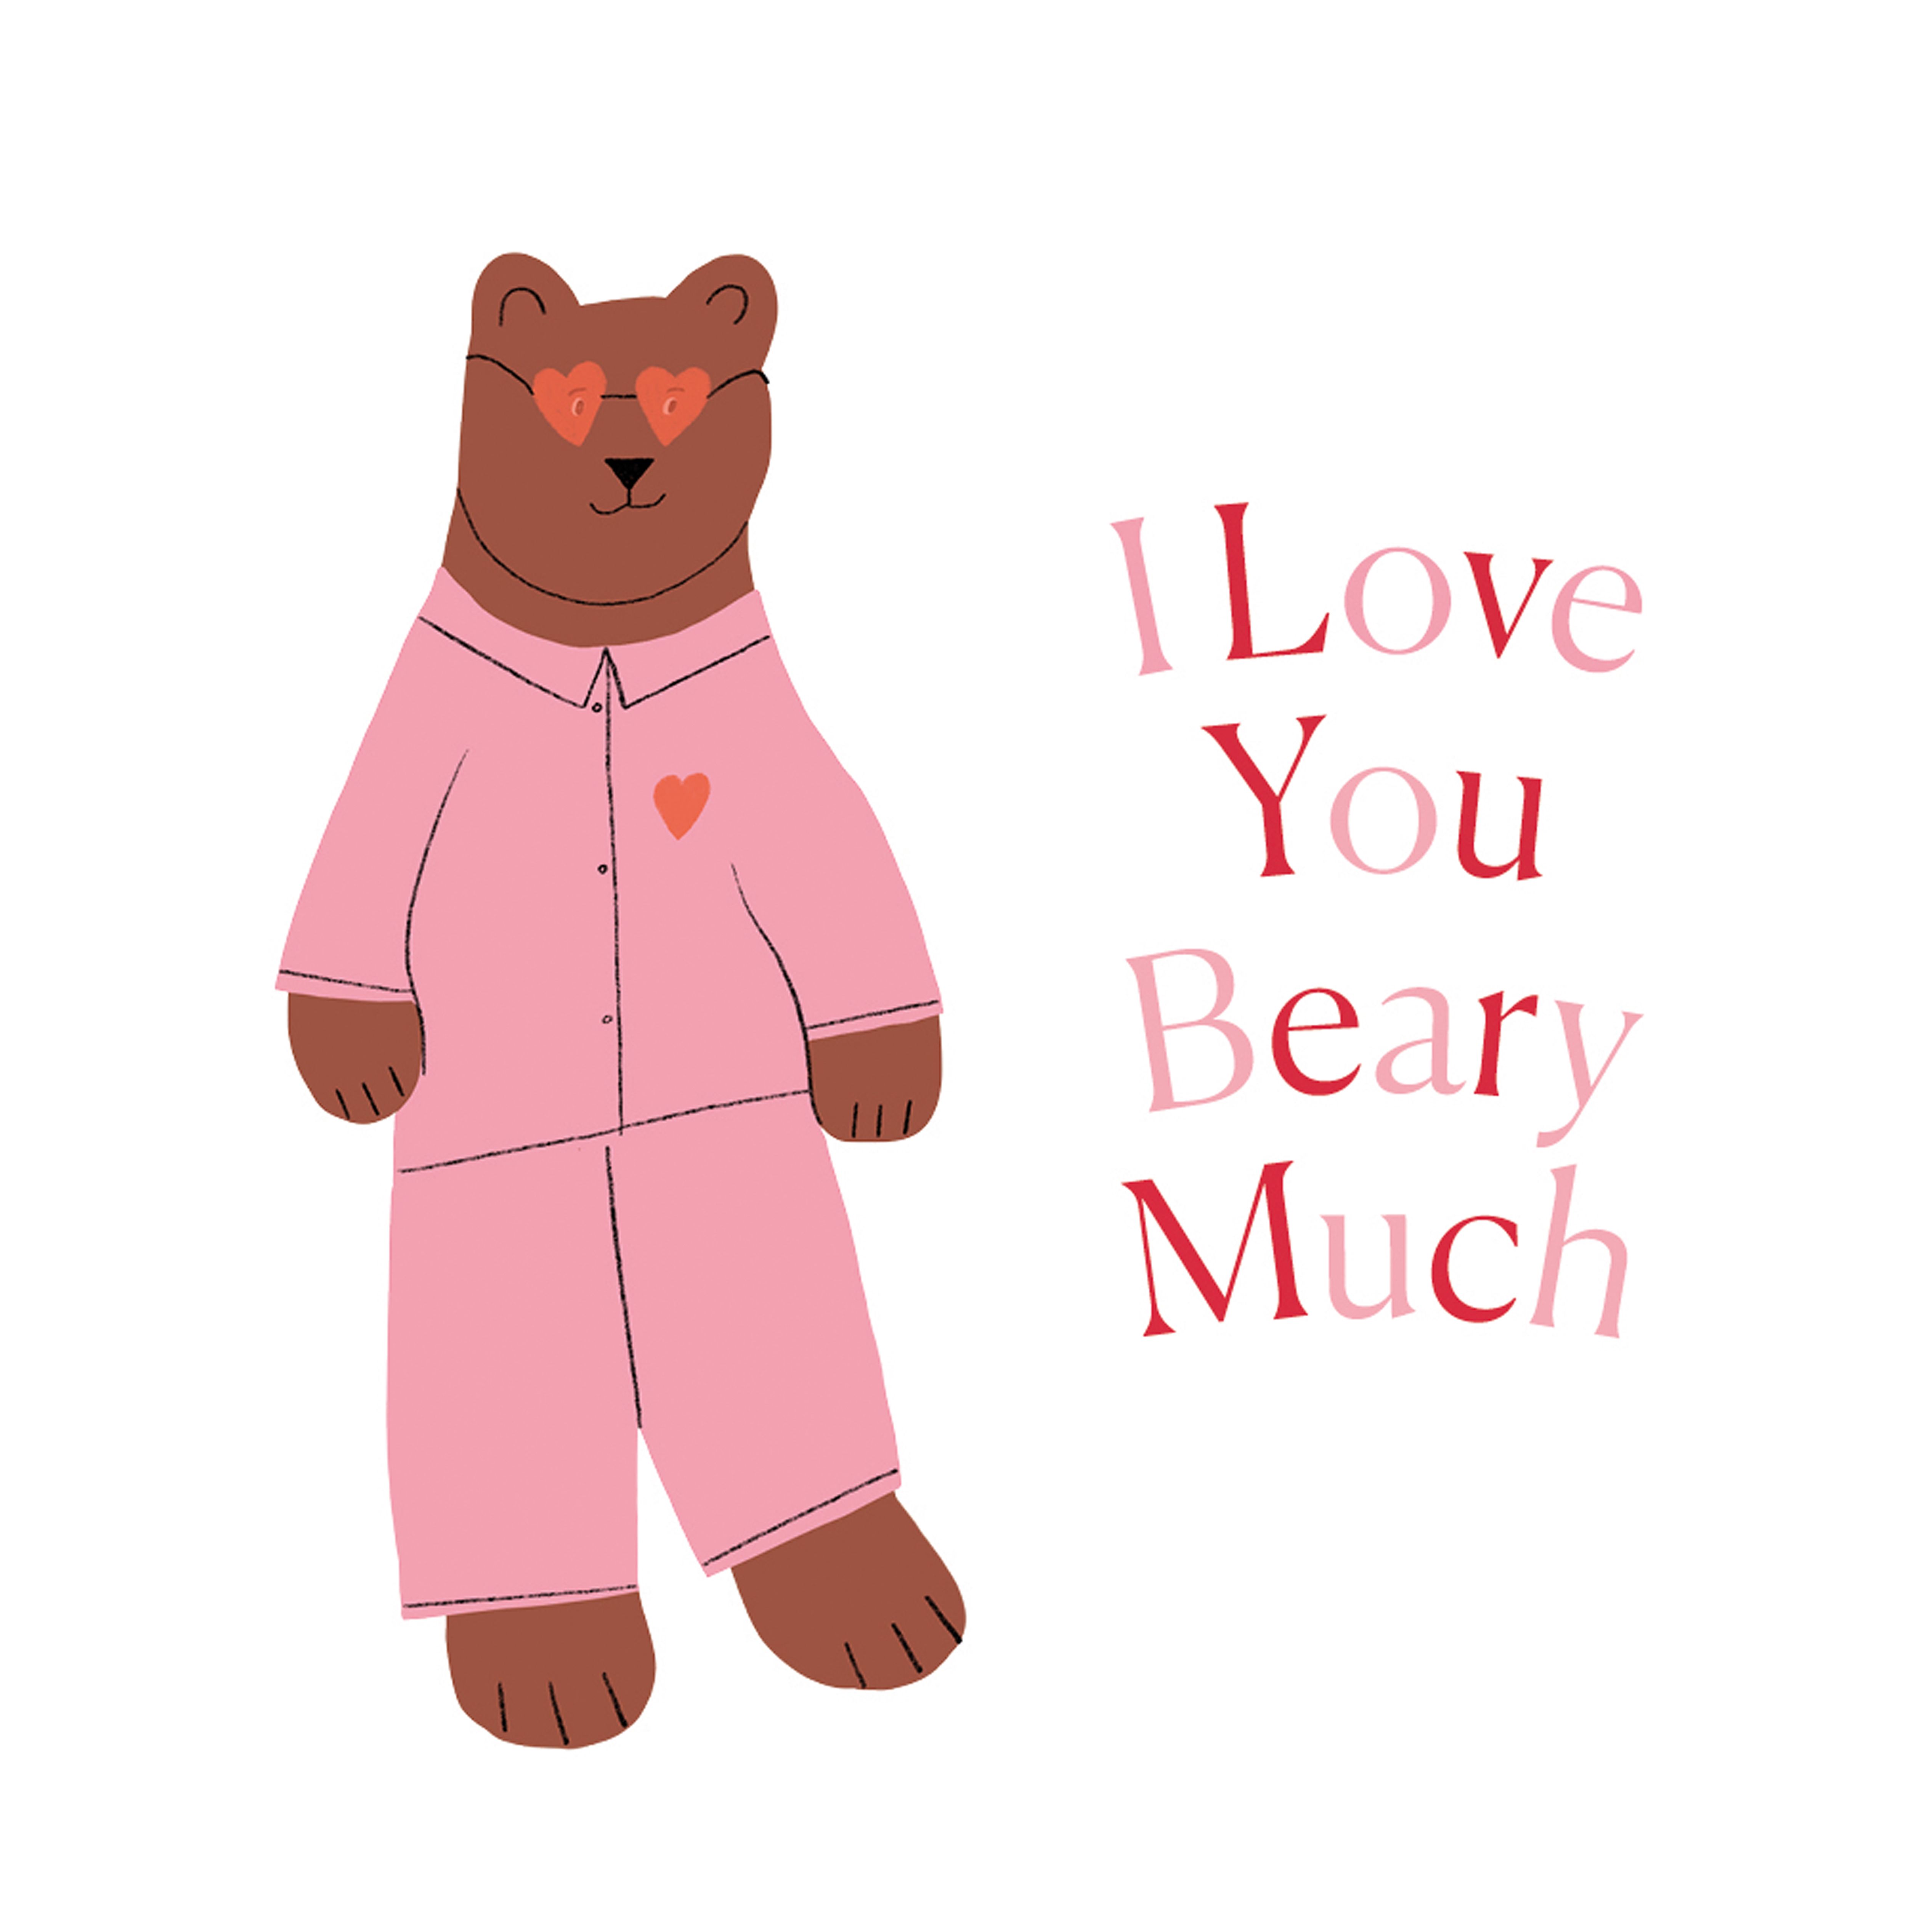 illustrated Valentines cards for kids with bears flowers and hearts